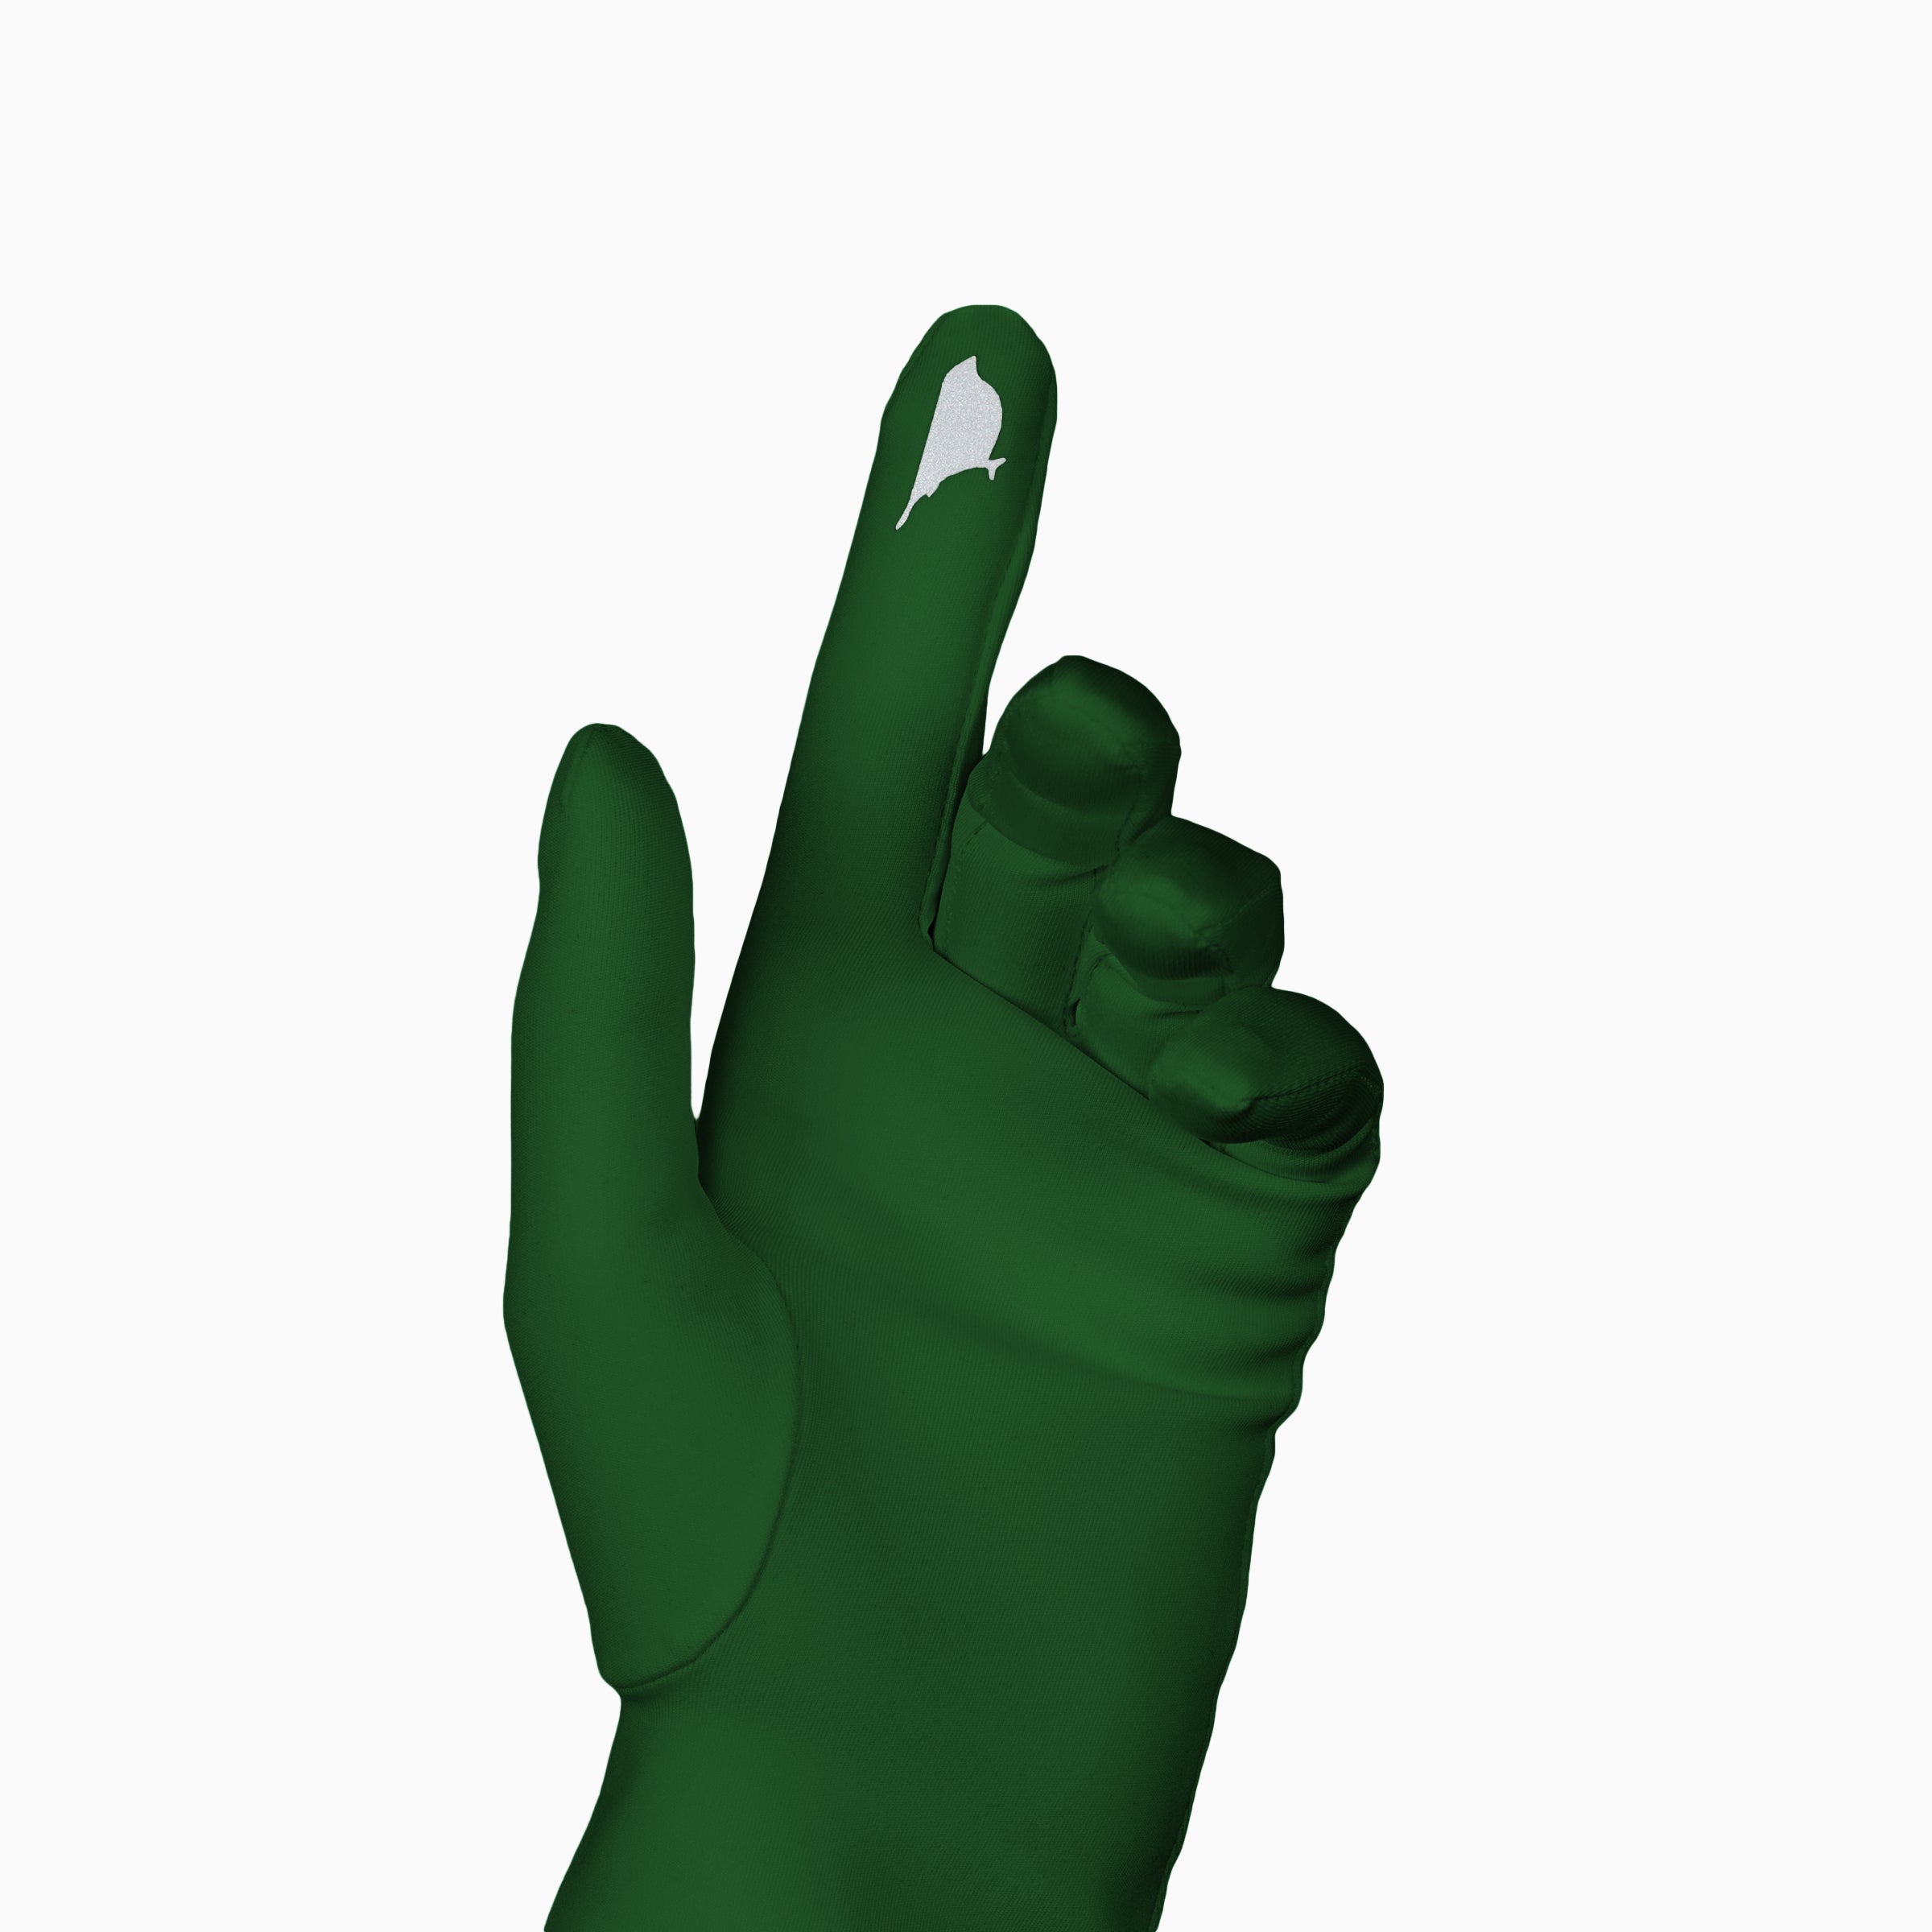 A 3d model of THE ISABELLE - Green Day Glove - Holiday Edition by LadyFinch with touchscreen index fingers pointing at a white background.